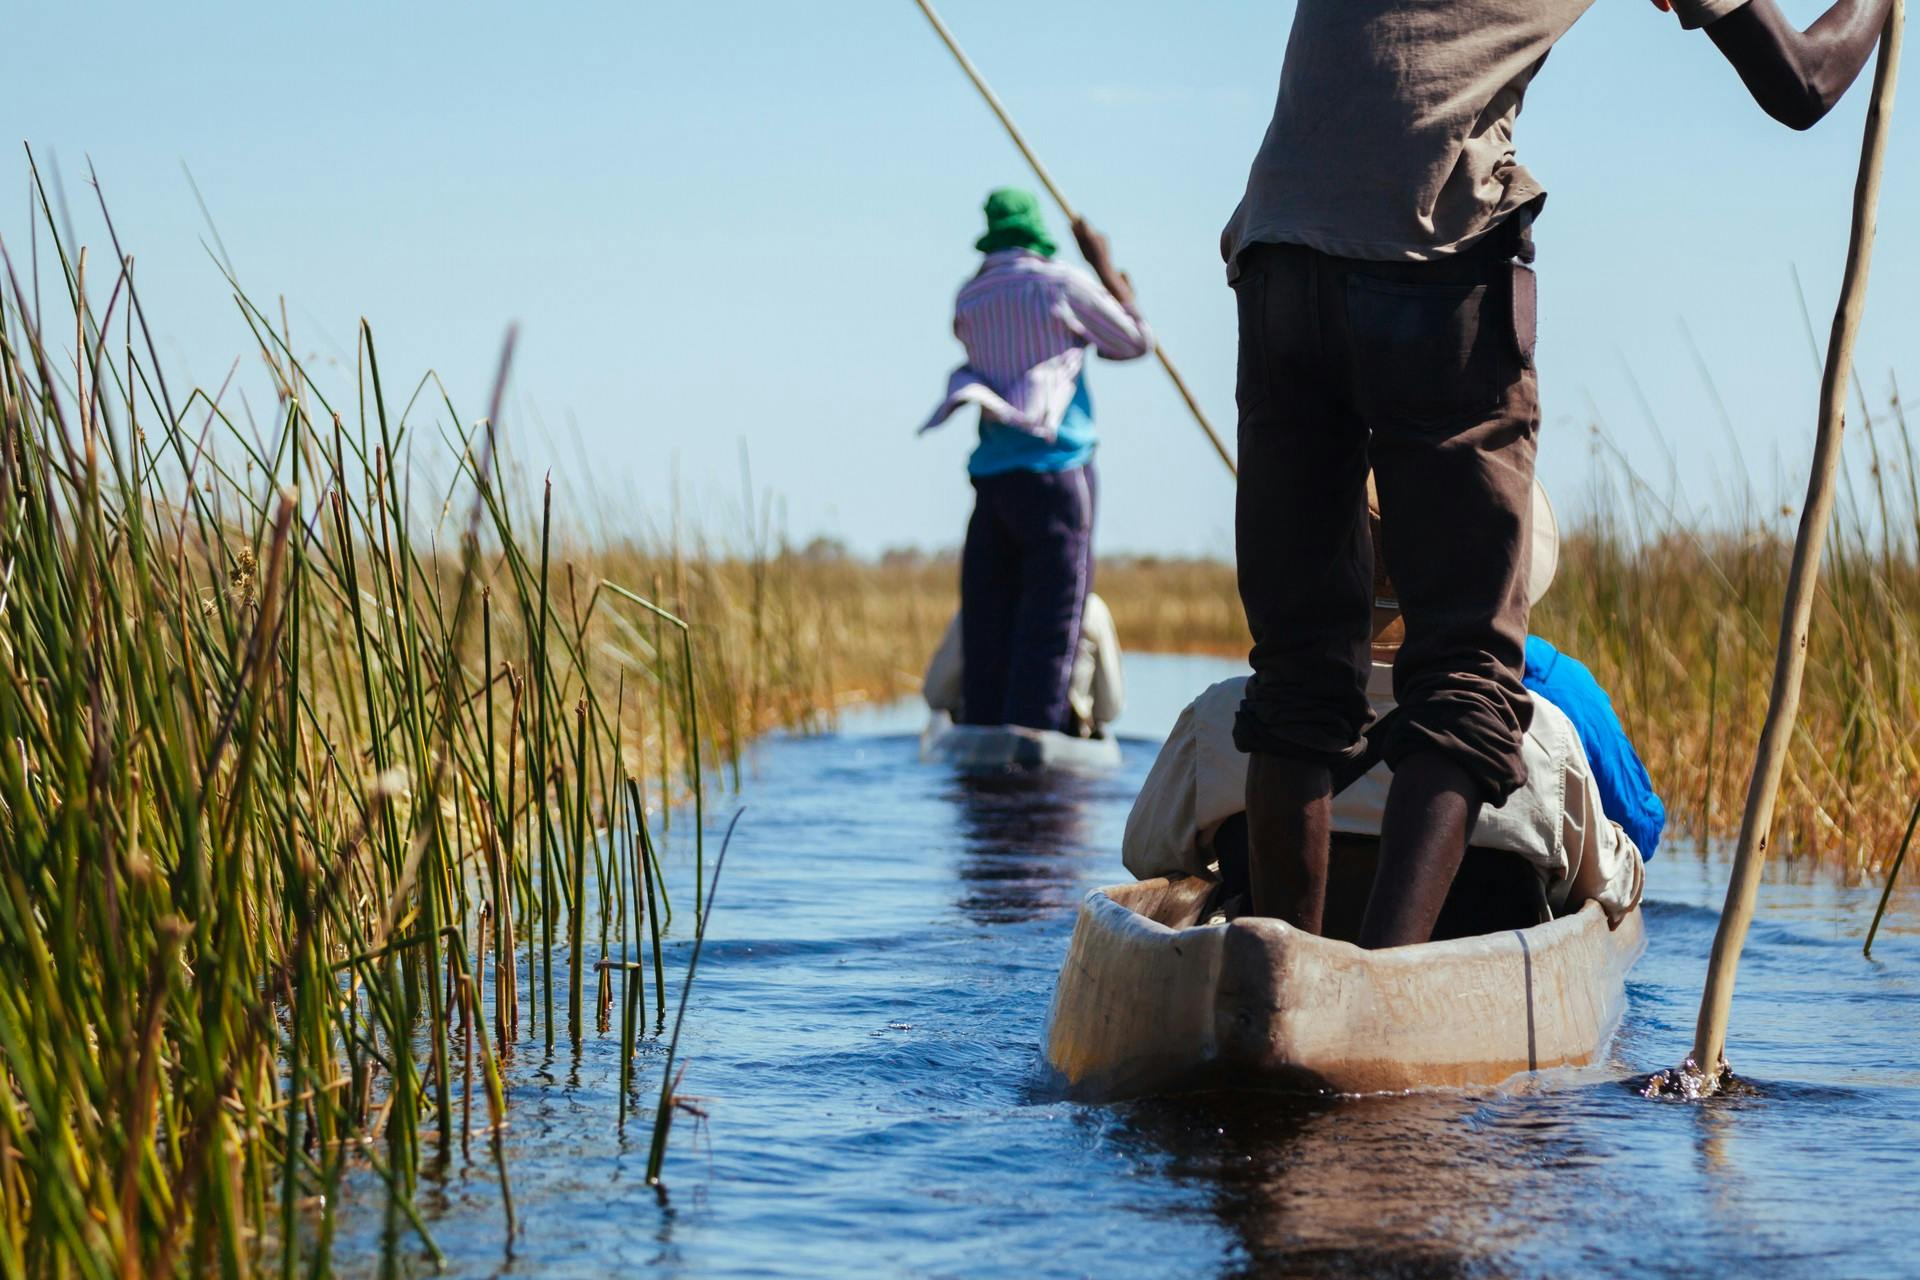 Local people giving a canoe tour in Botswana